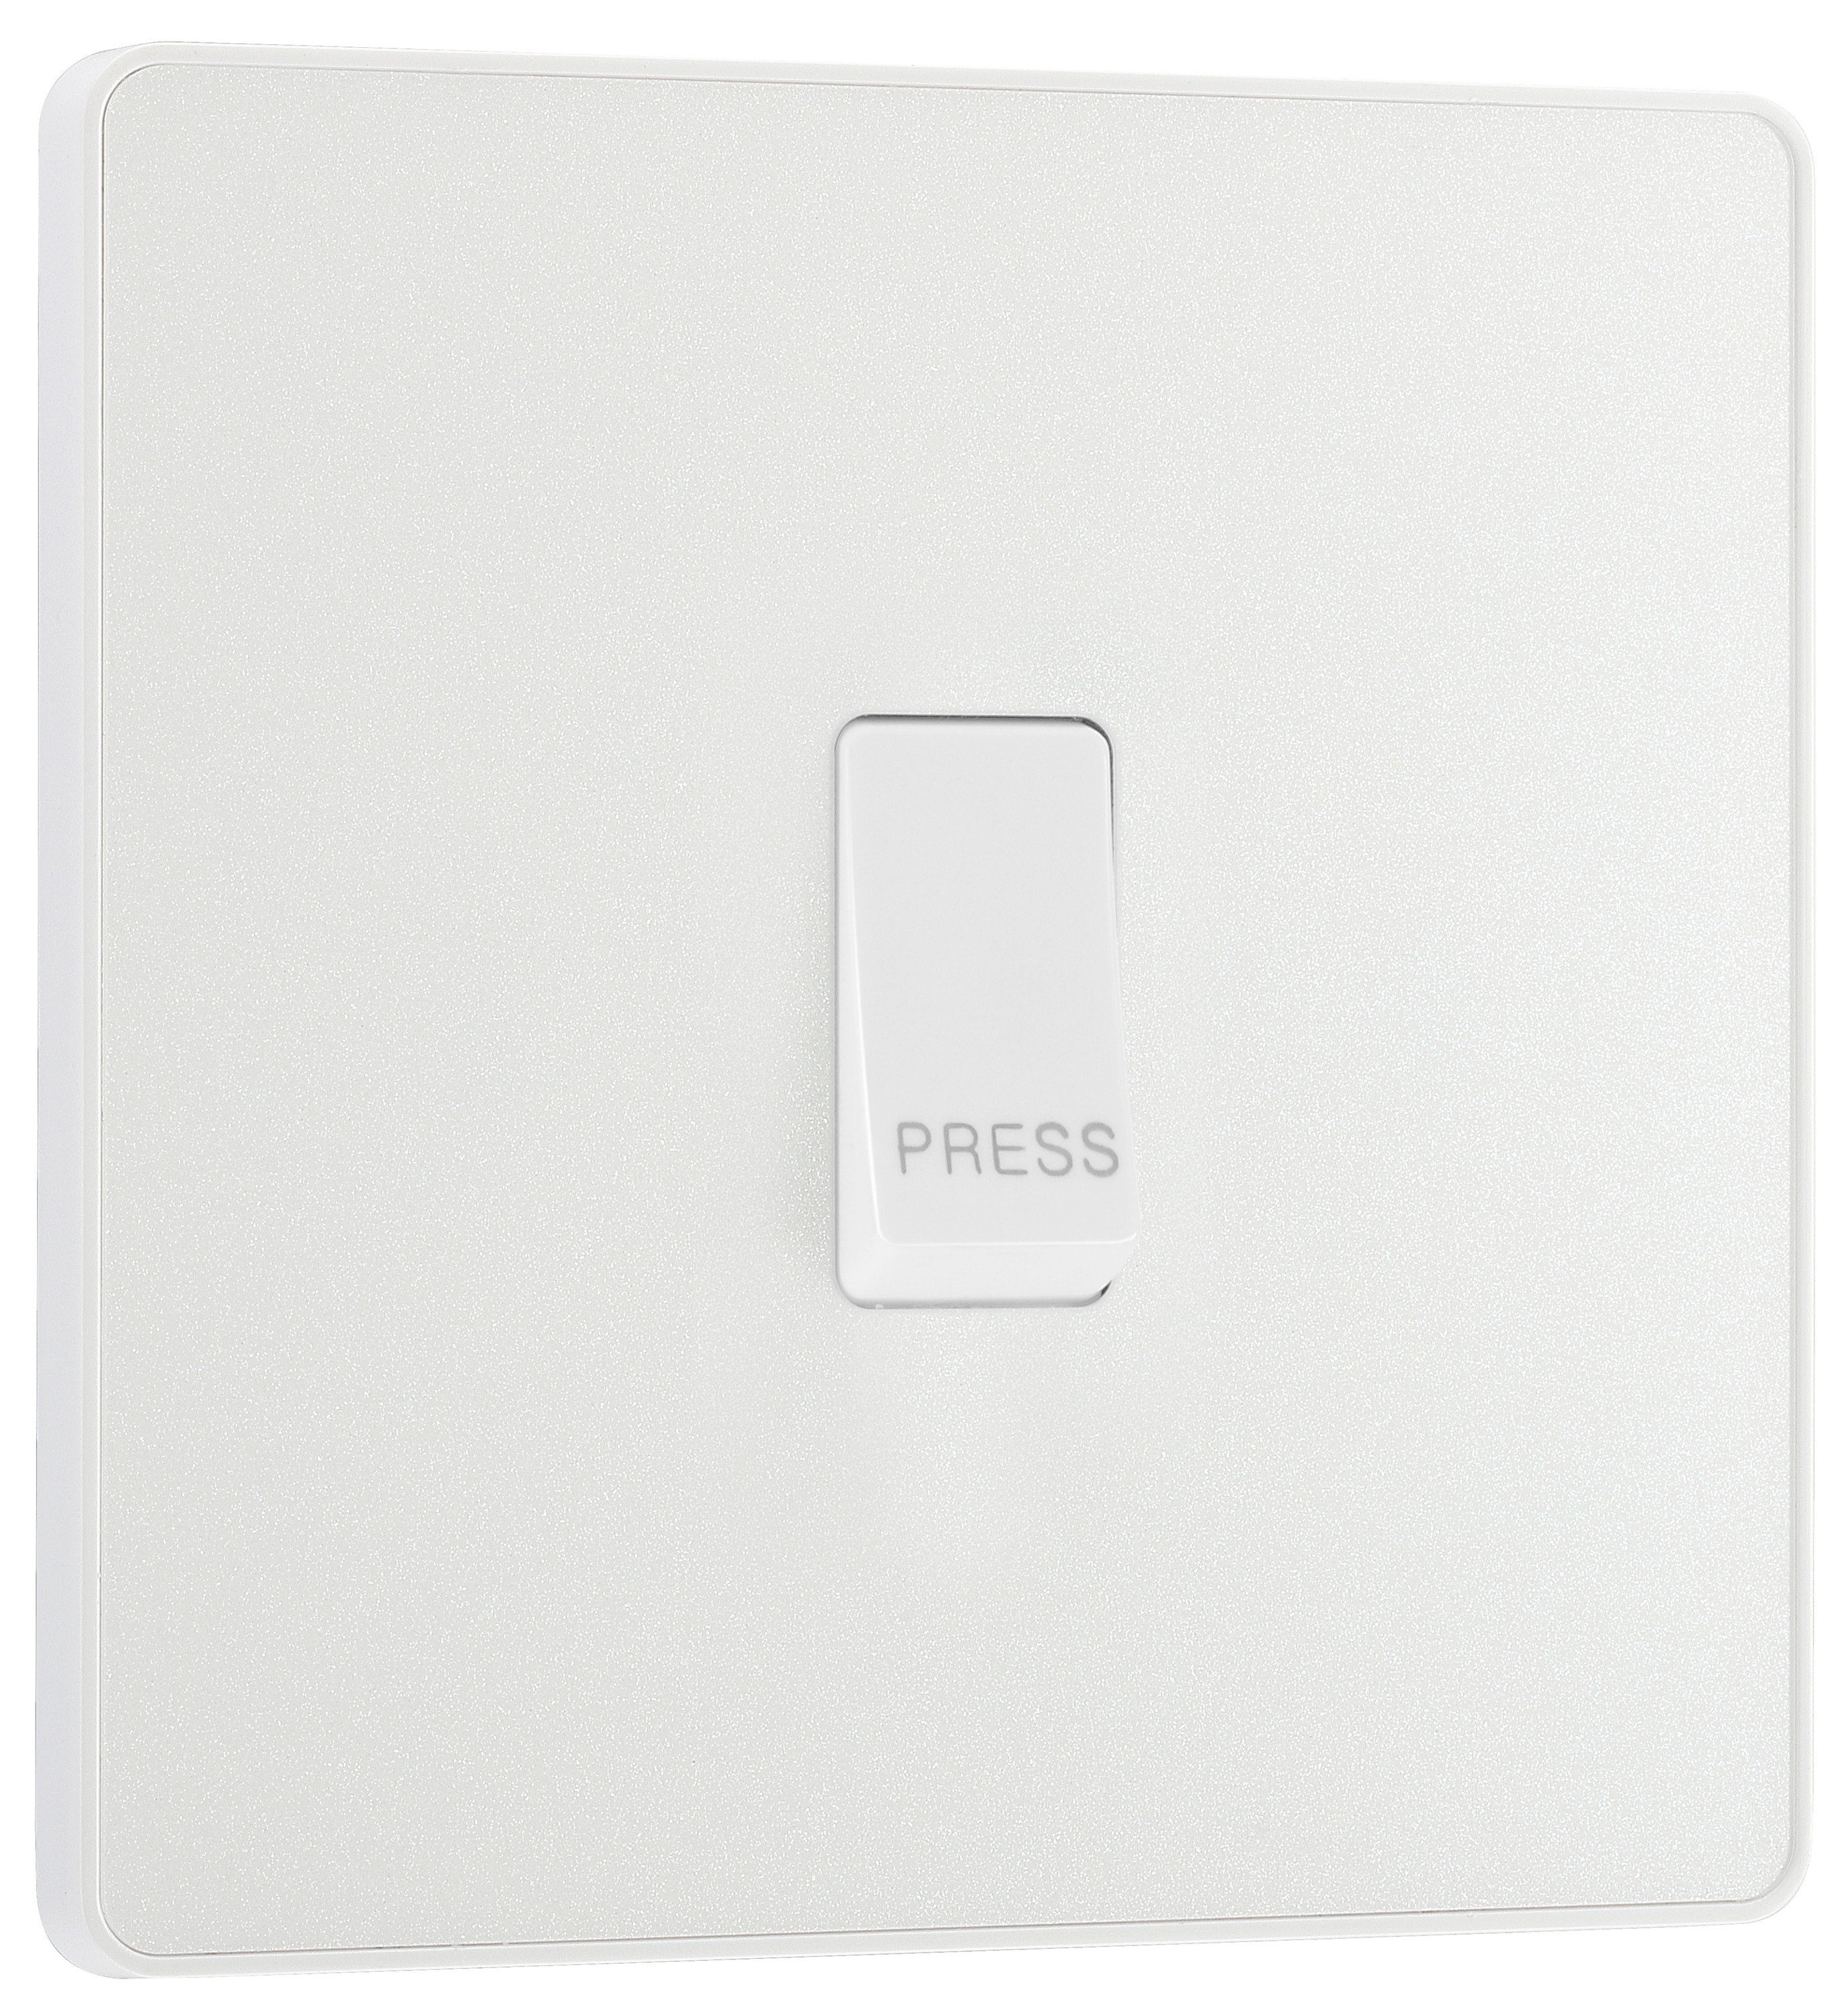 Image of BG Evolve Pearlescent White 10A Single Press Switch